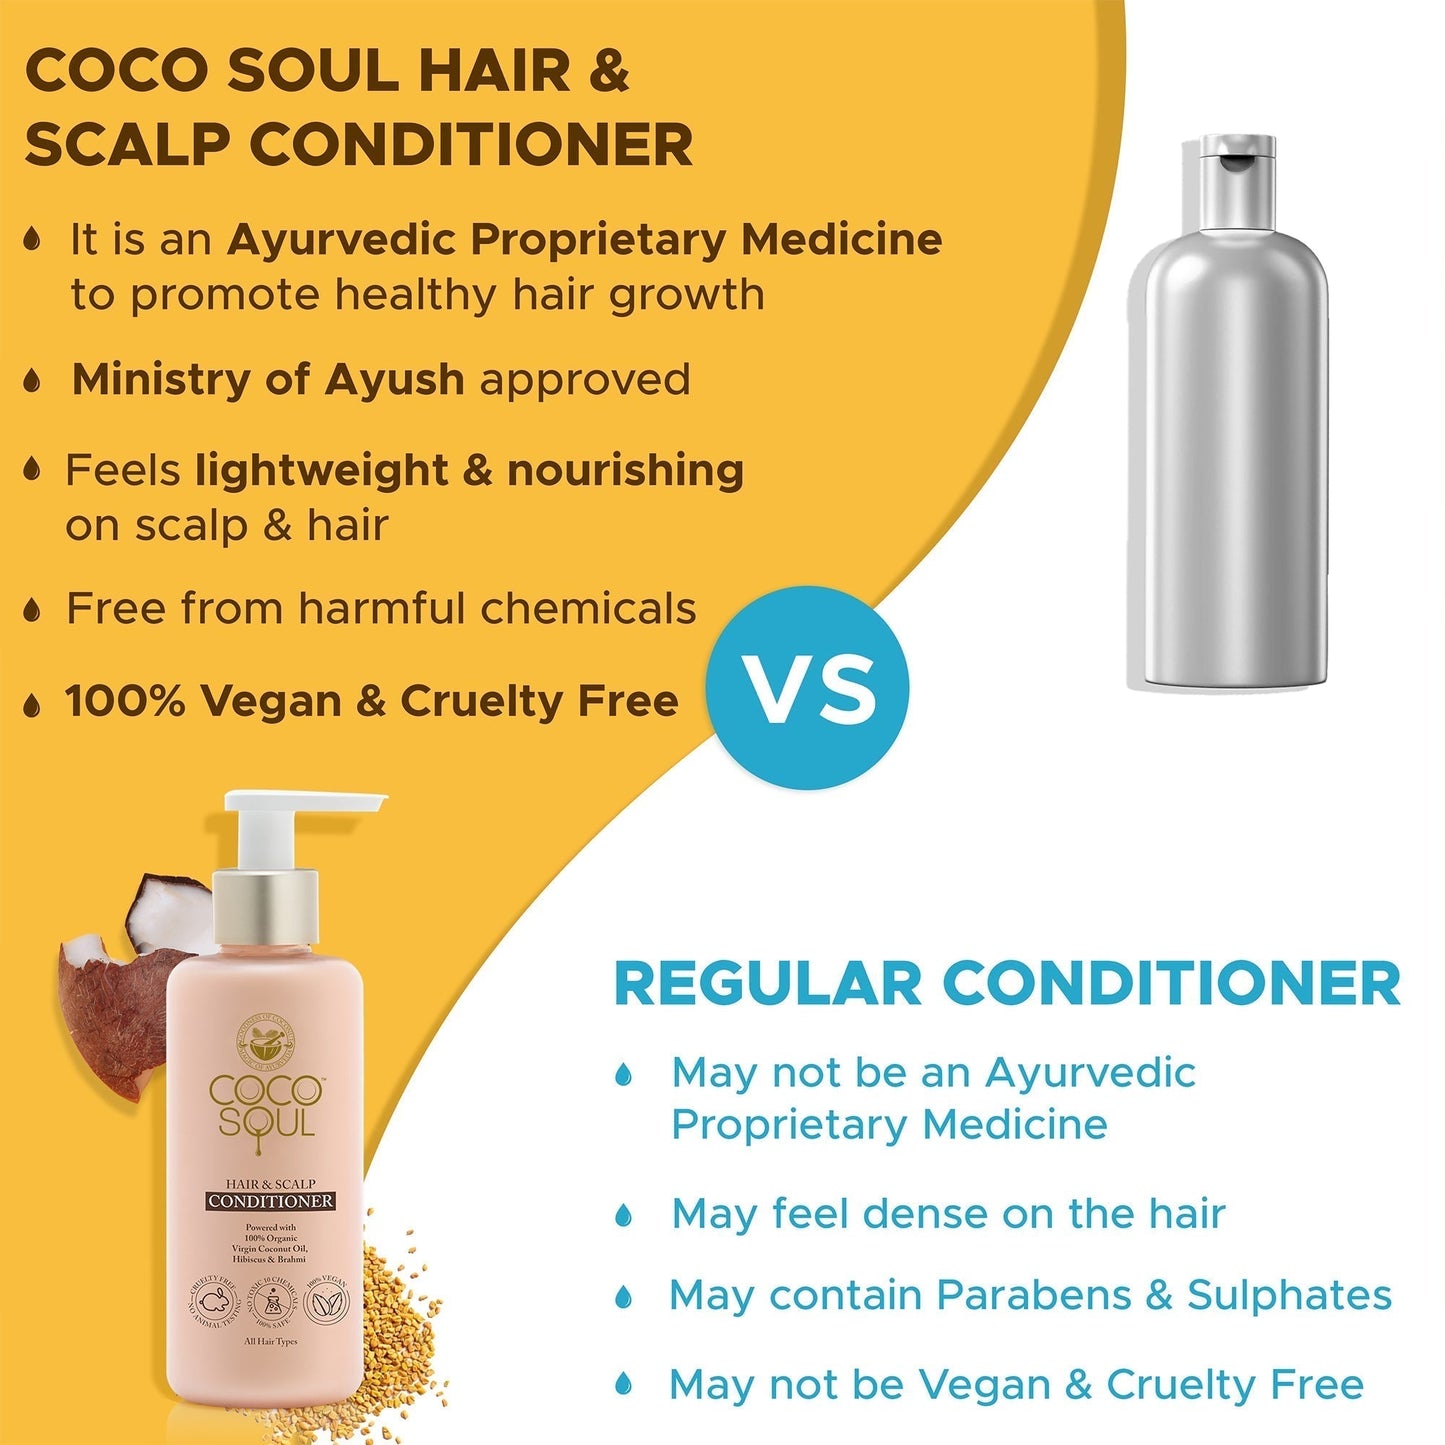 BOGO Conditioner - Hair  Scalp  From the makers of Parachute Advansed  200ml